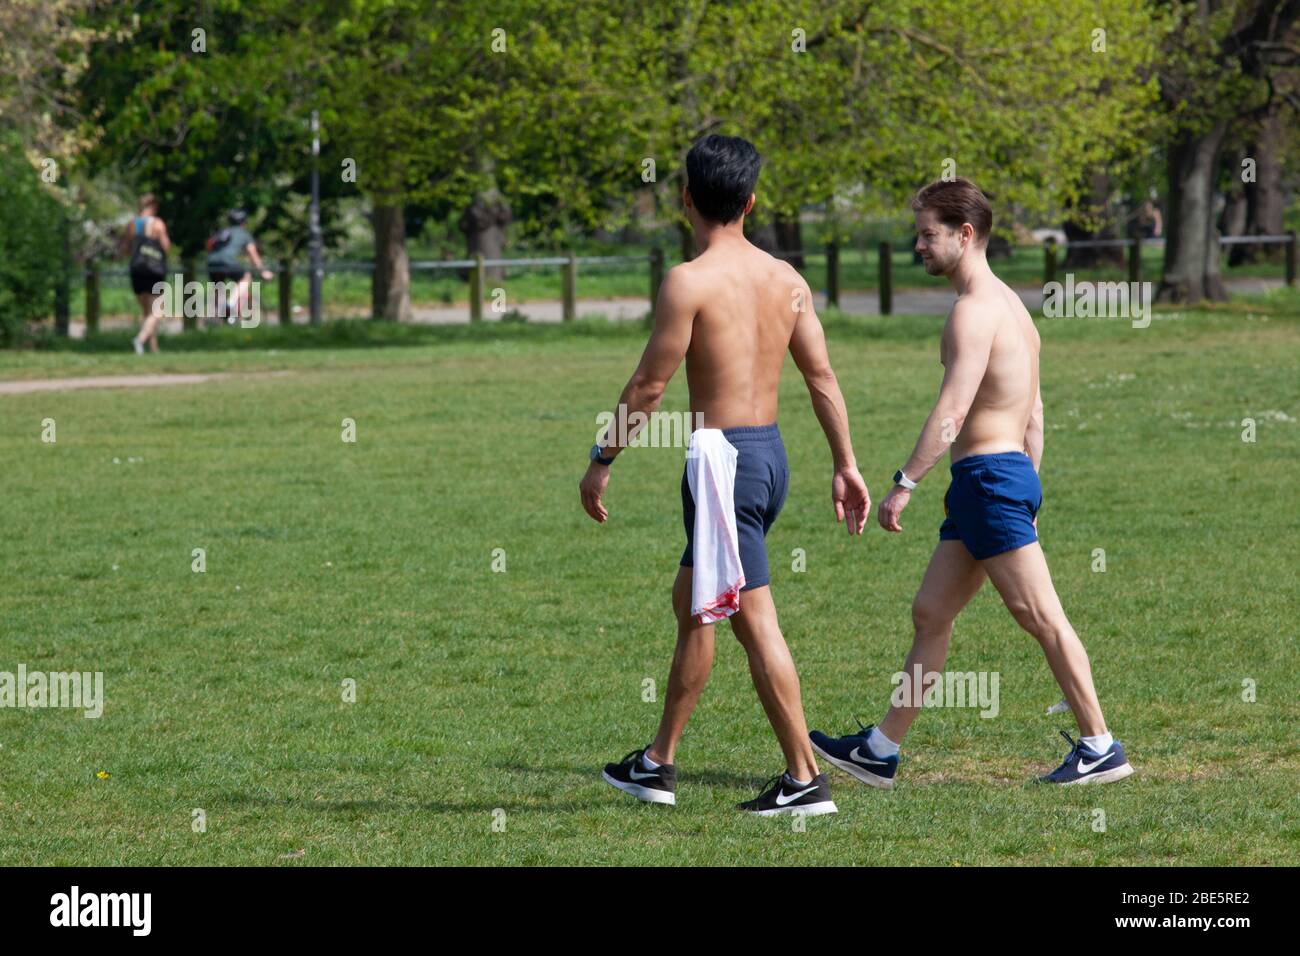 London, UK, 12 April 2020: On Easter Sunday people observe social distancing rules as they take exercise and fresh air in the sunshine on Clapham Common. Anna Watson/ Alamy Live News Stock Photo